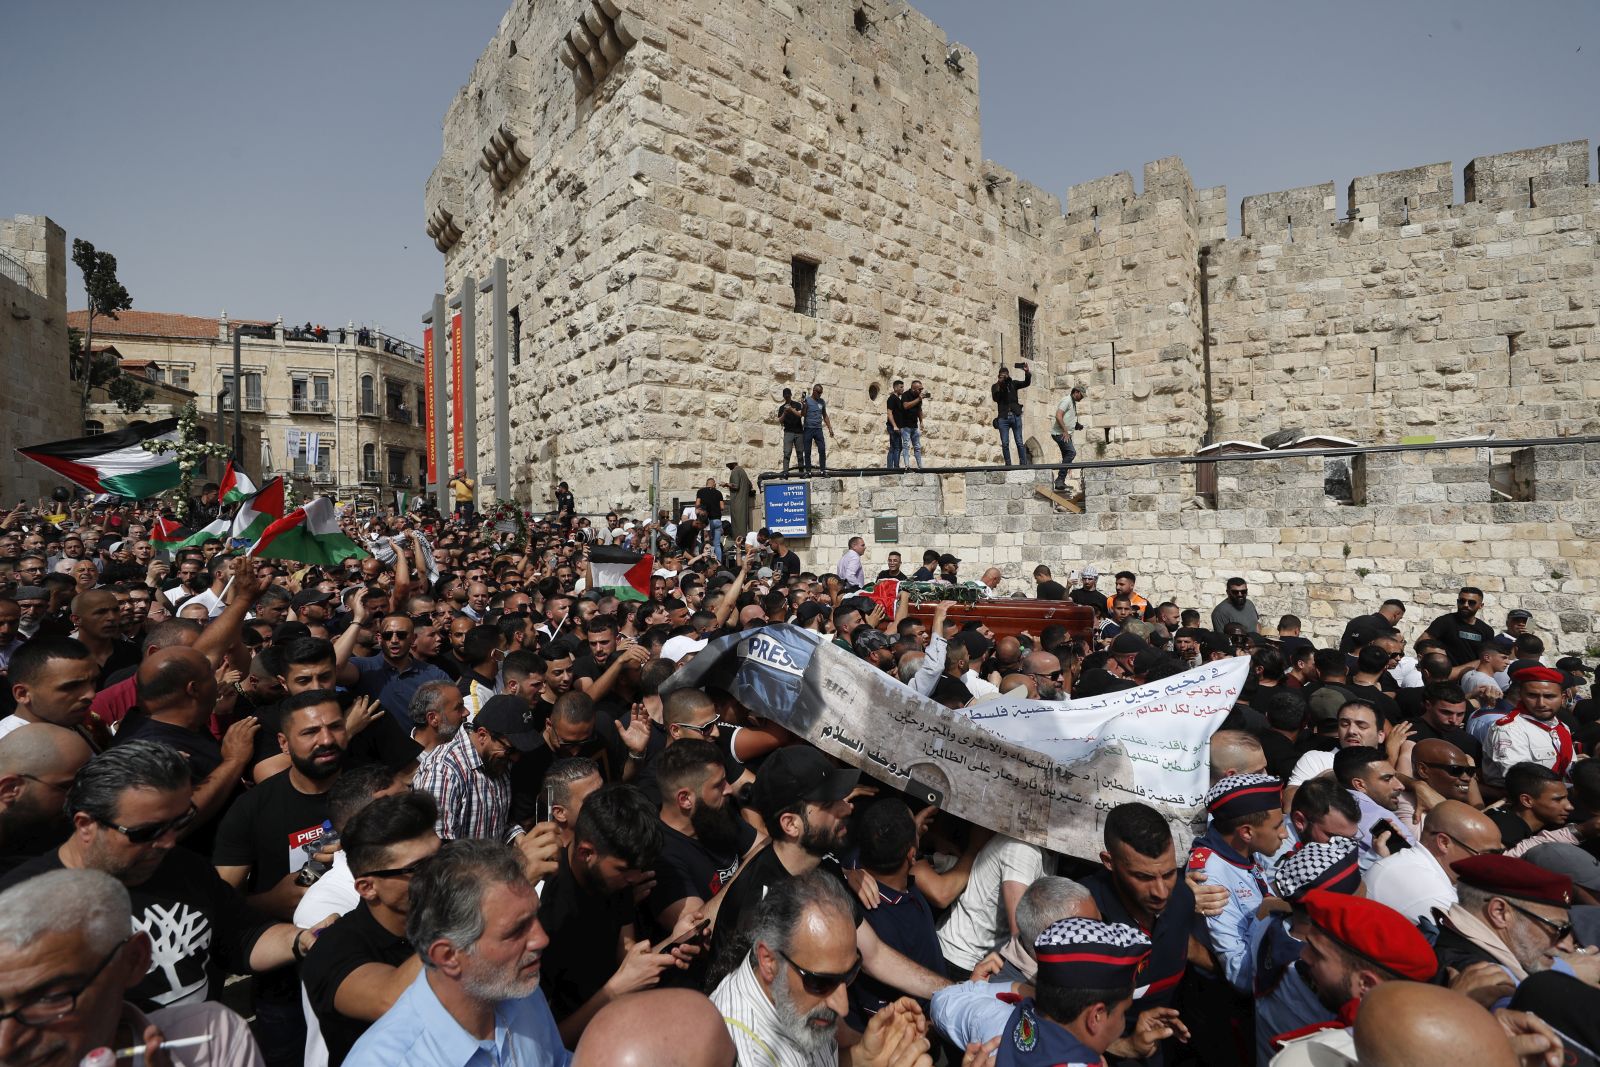 epa09944461 Mourners carry the coffin of slain American-Palestinian journalist Shireen Abu Akleh during a procession prior to her funeral in the Old City of Jerusalem, 13 May 2022. Al Jazeera journalist Shireen Abu Akleh was killed on 11 May 2022 during a raid by Israeli forces in the West Bank town of Jenin.  EPA/ATEF SAFADI